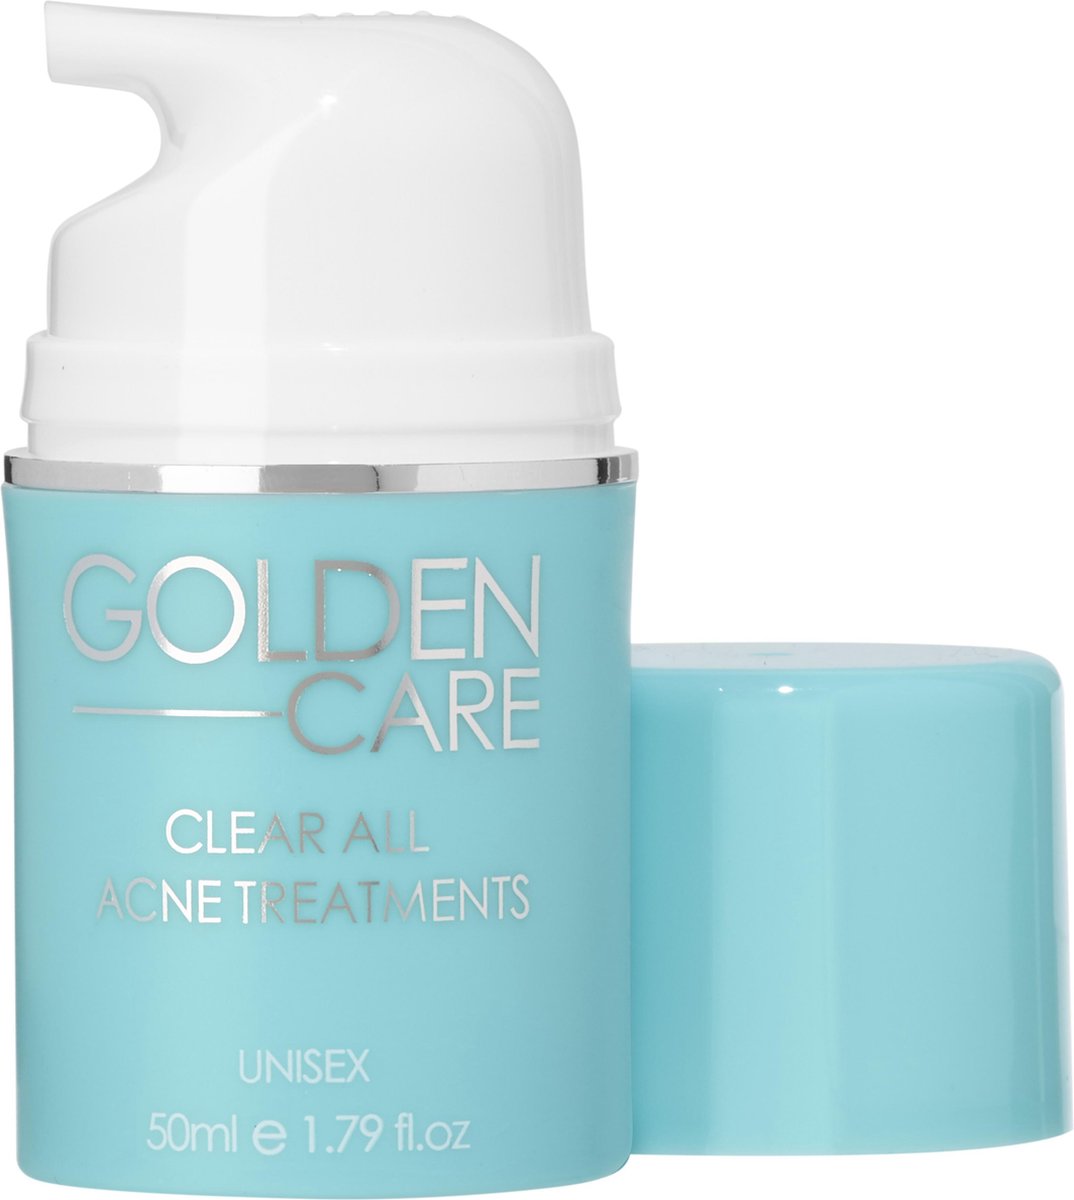 Golden Care Clear All Acne Treatments 50ml